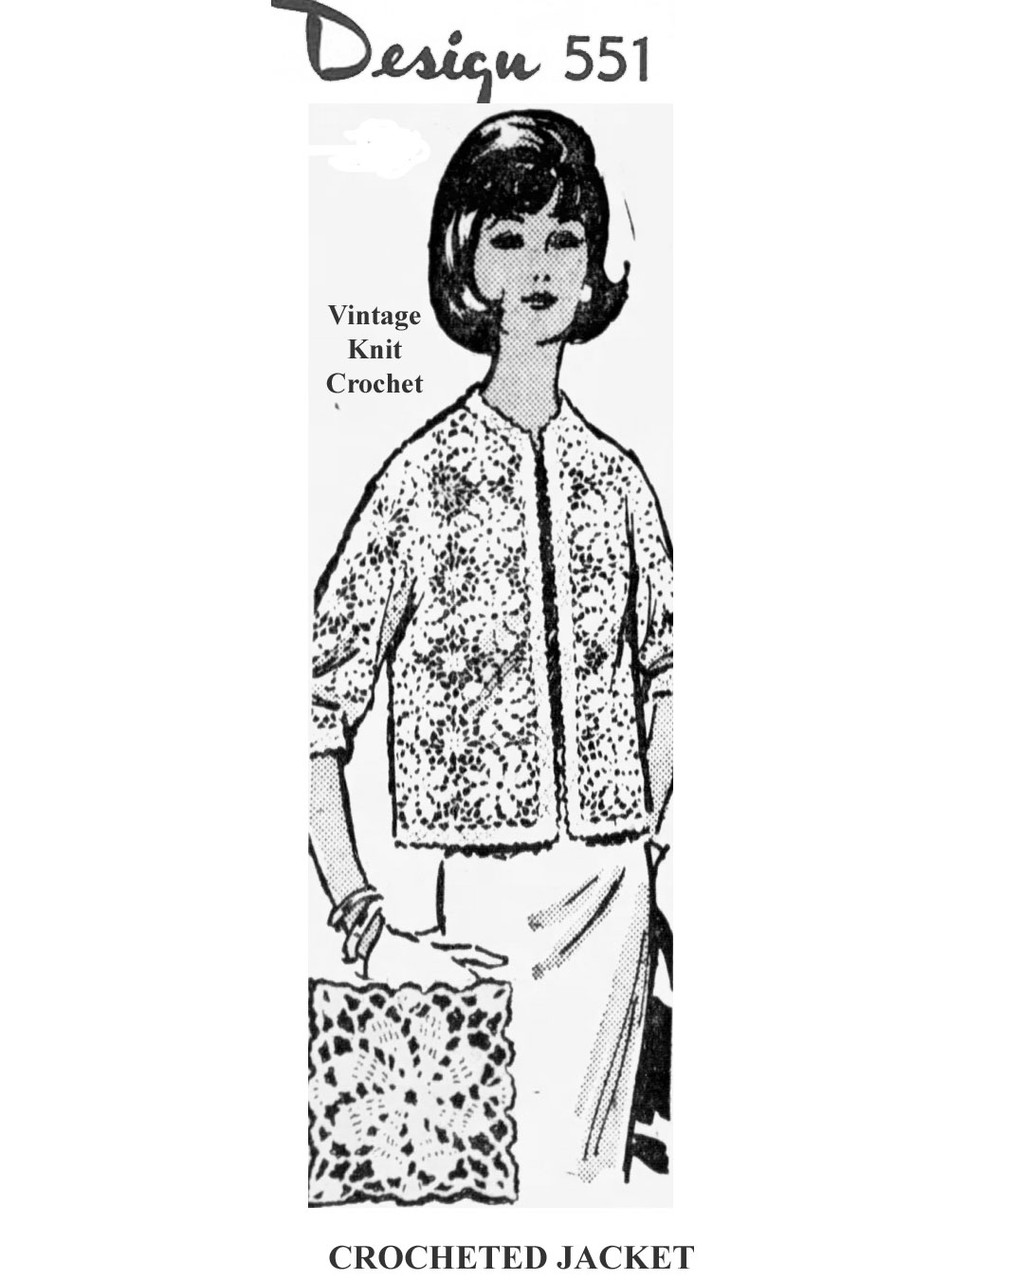 Plus Size Crocheted Jacket Pattern of Lace Medallions, Design 551
